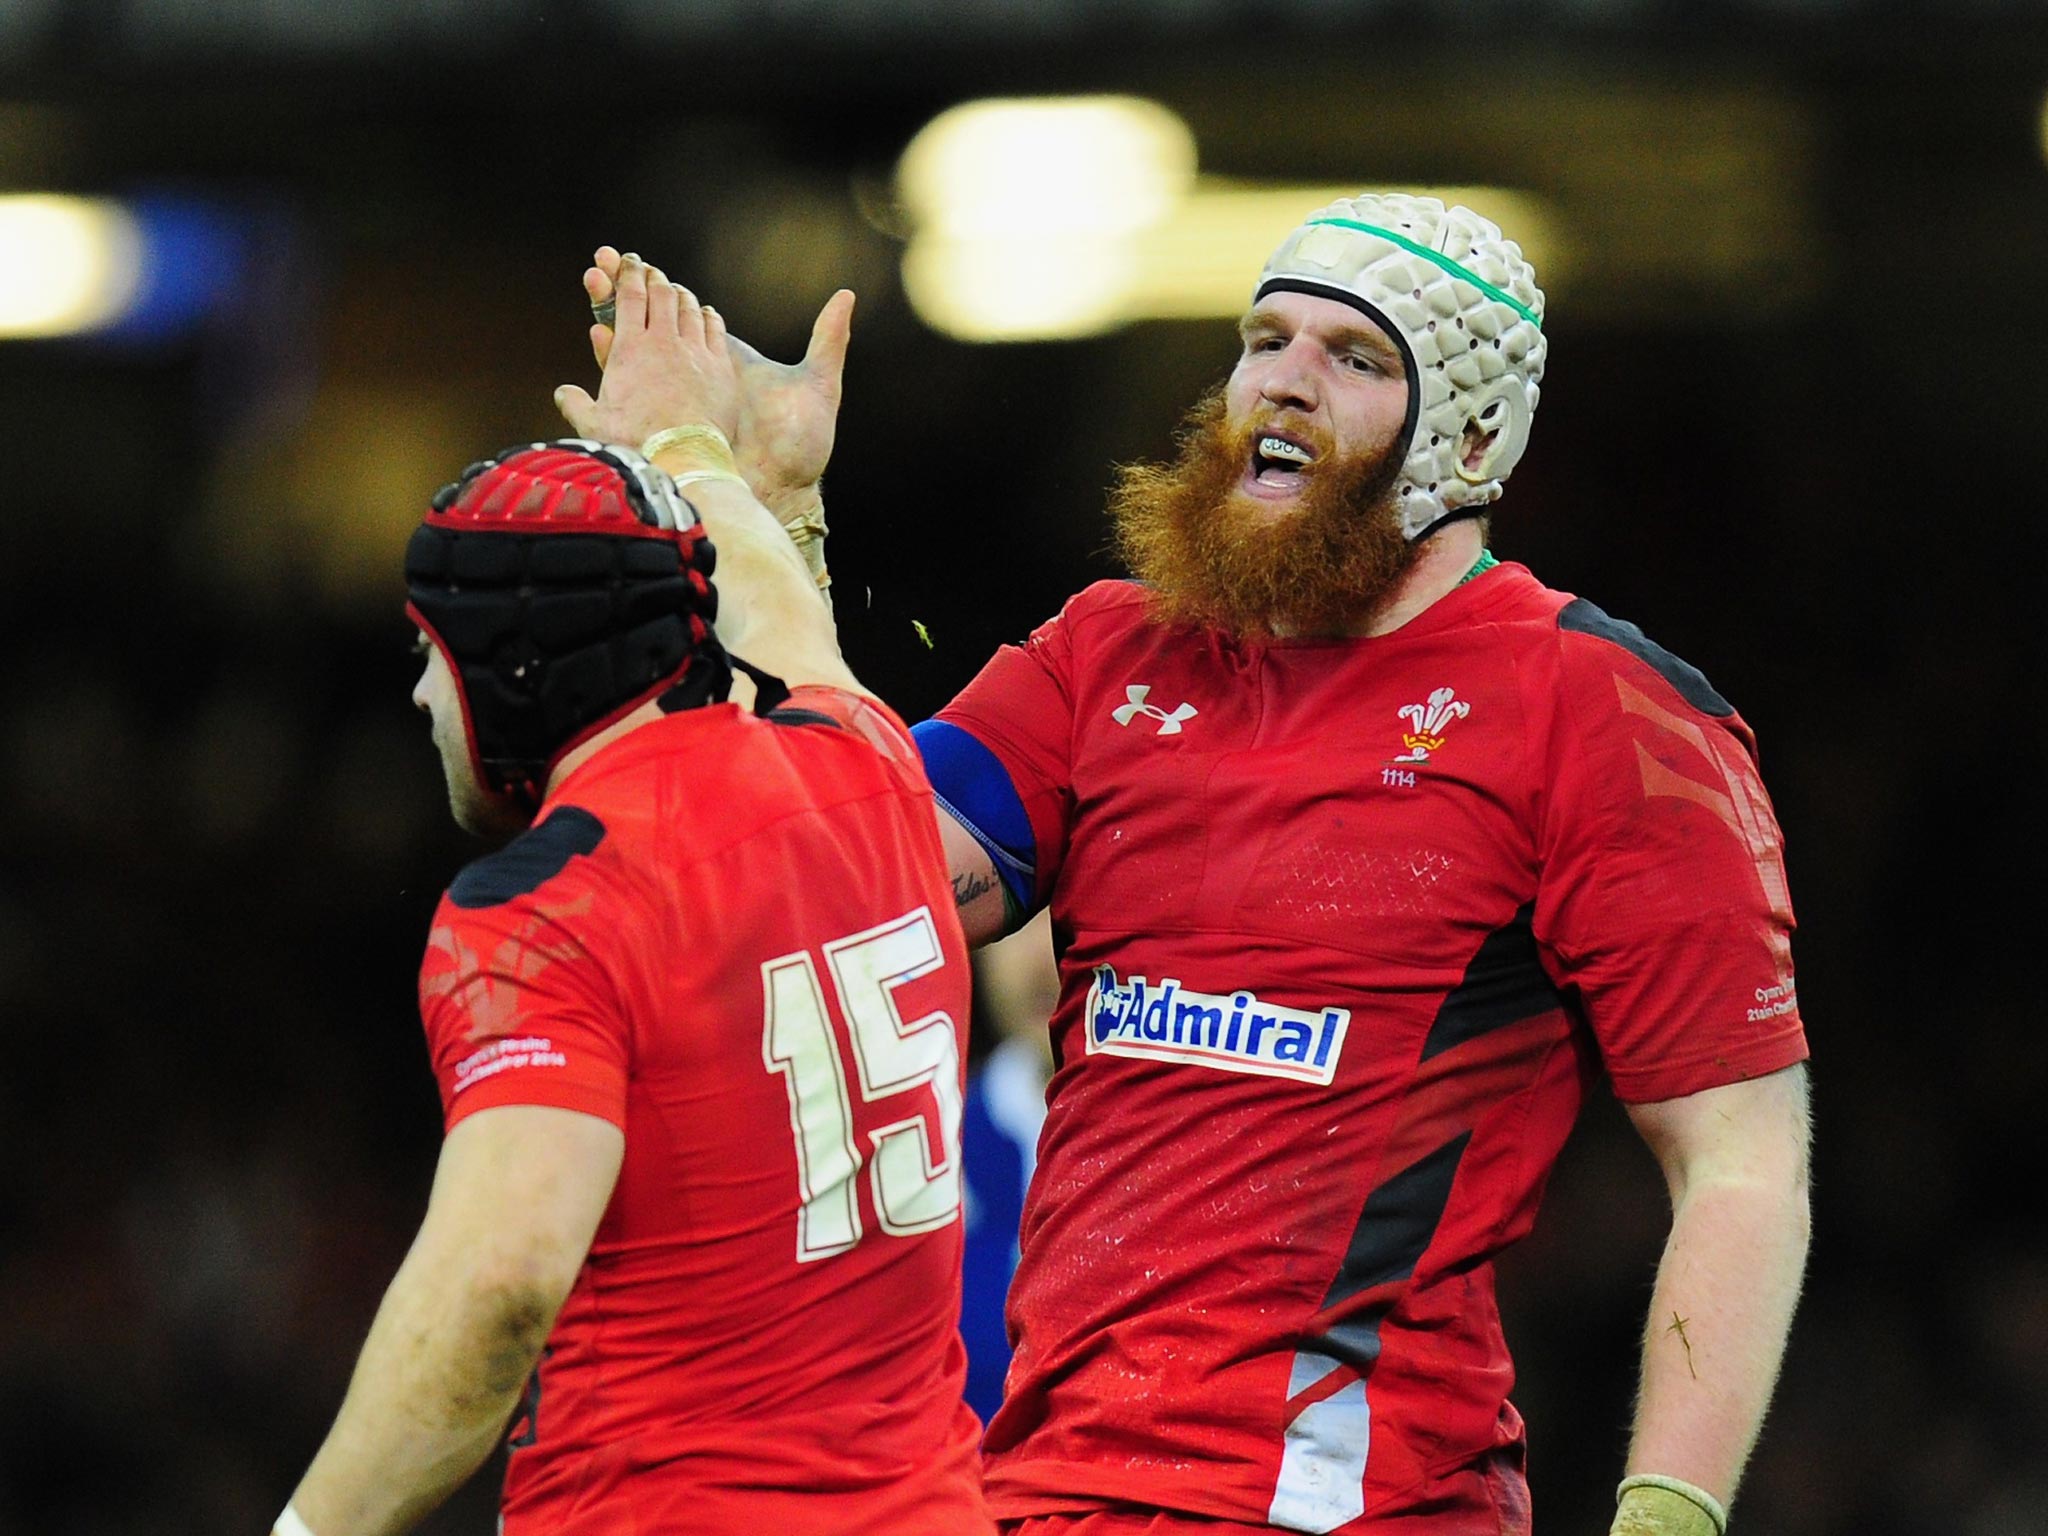 Jake Ball, born in Ascot, will make his second start for Wales at Twickenham tomorrow